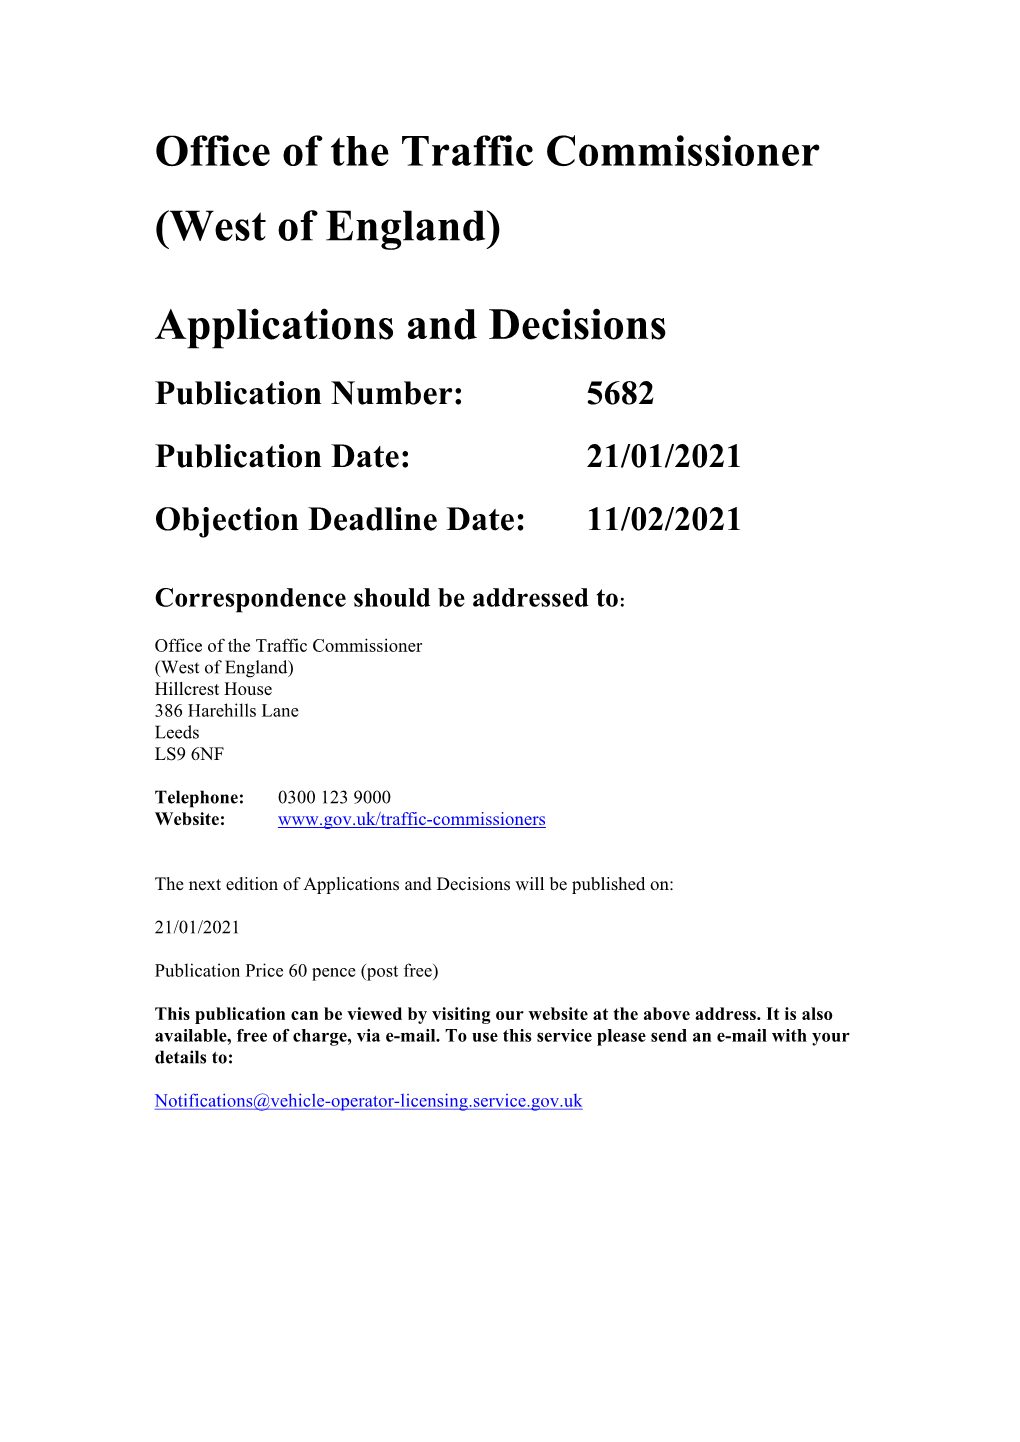 Applications and Decisions for the West of England 5682